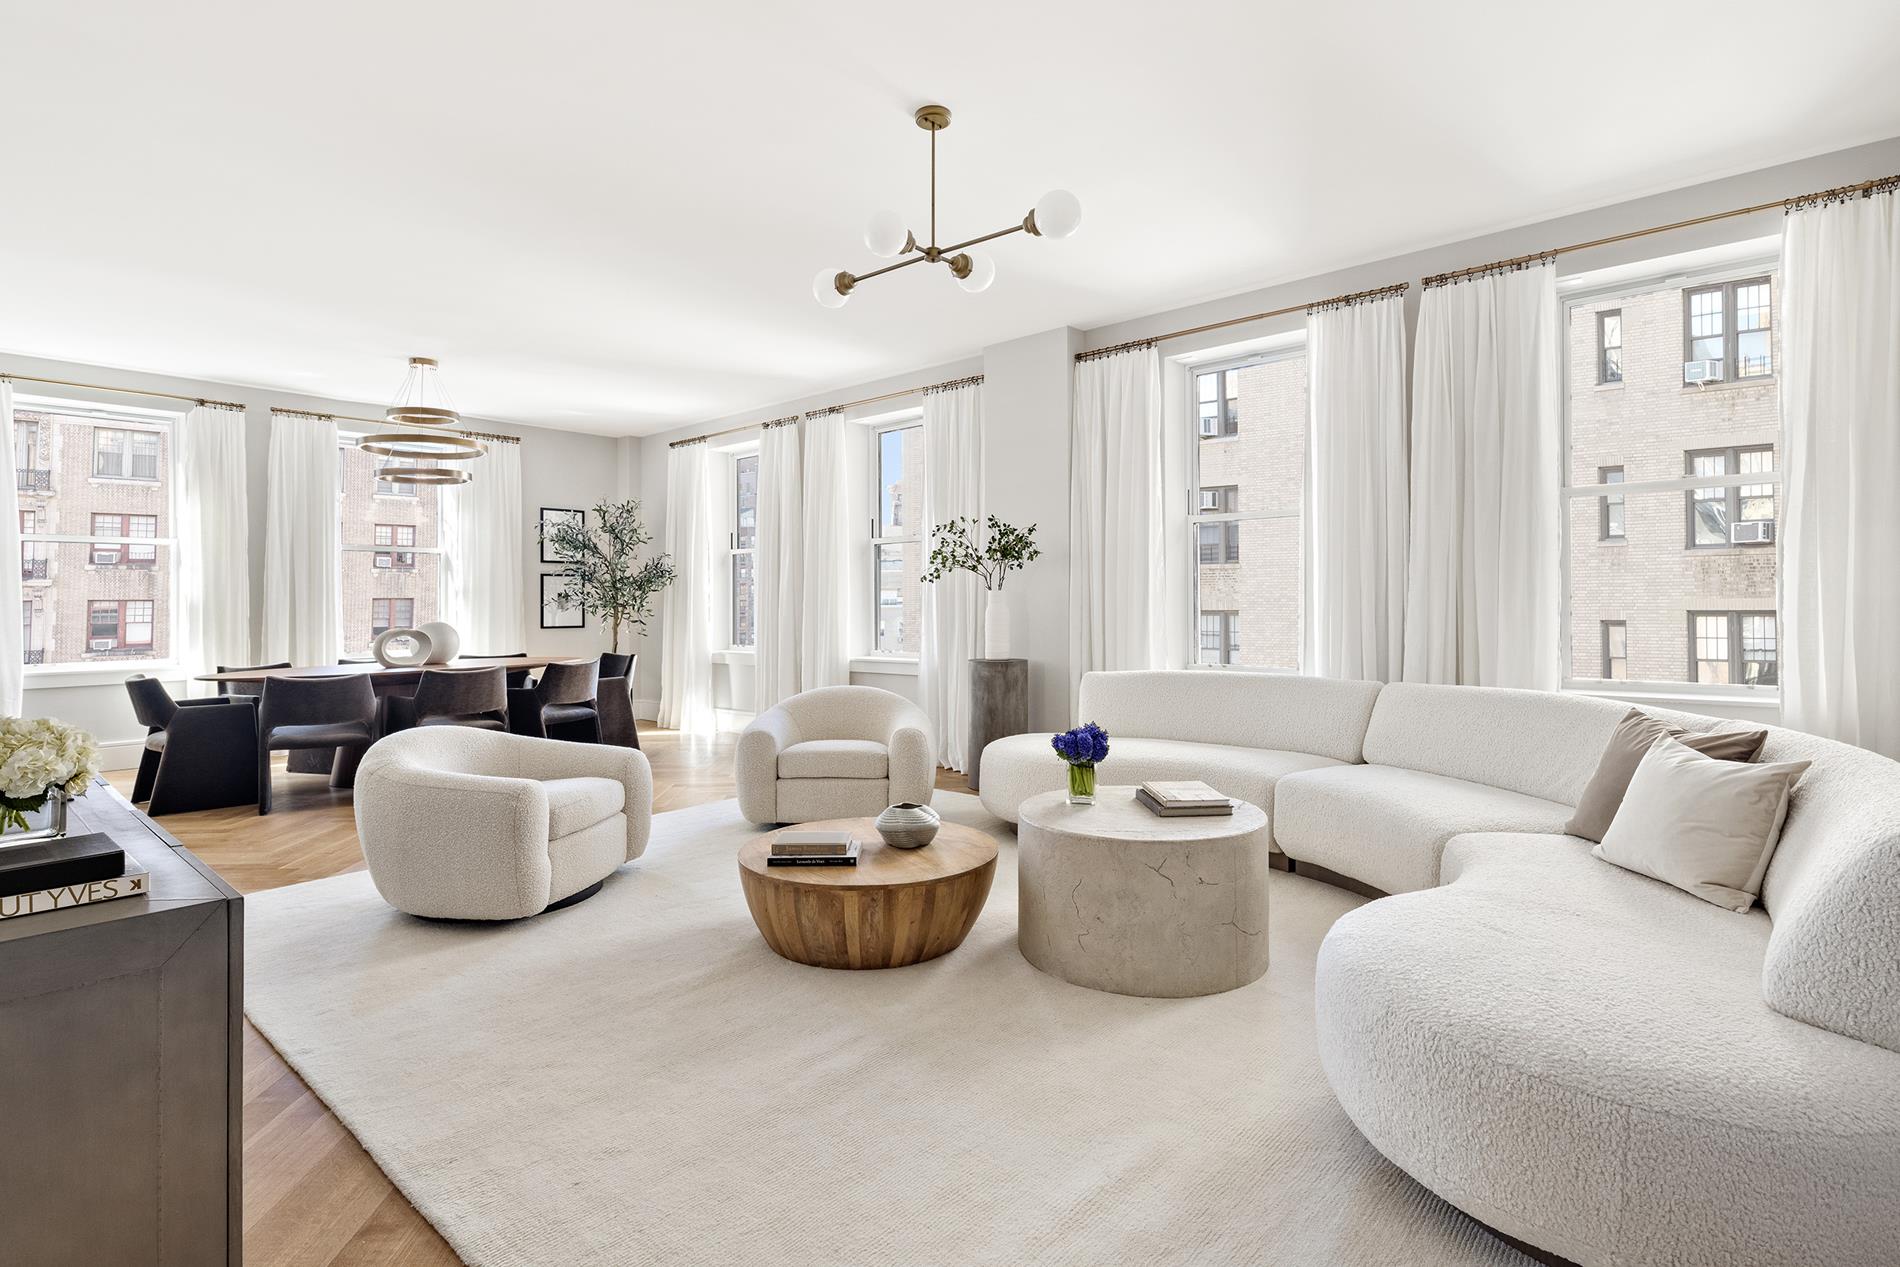 378 West End Avenue 7-A, Upper West Side, Upper West Side, NYC - 4 Bedrooms  
4.5 Bathrooms  
6 Rooms - 